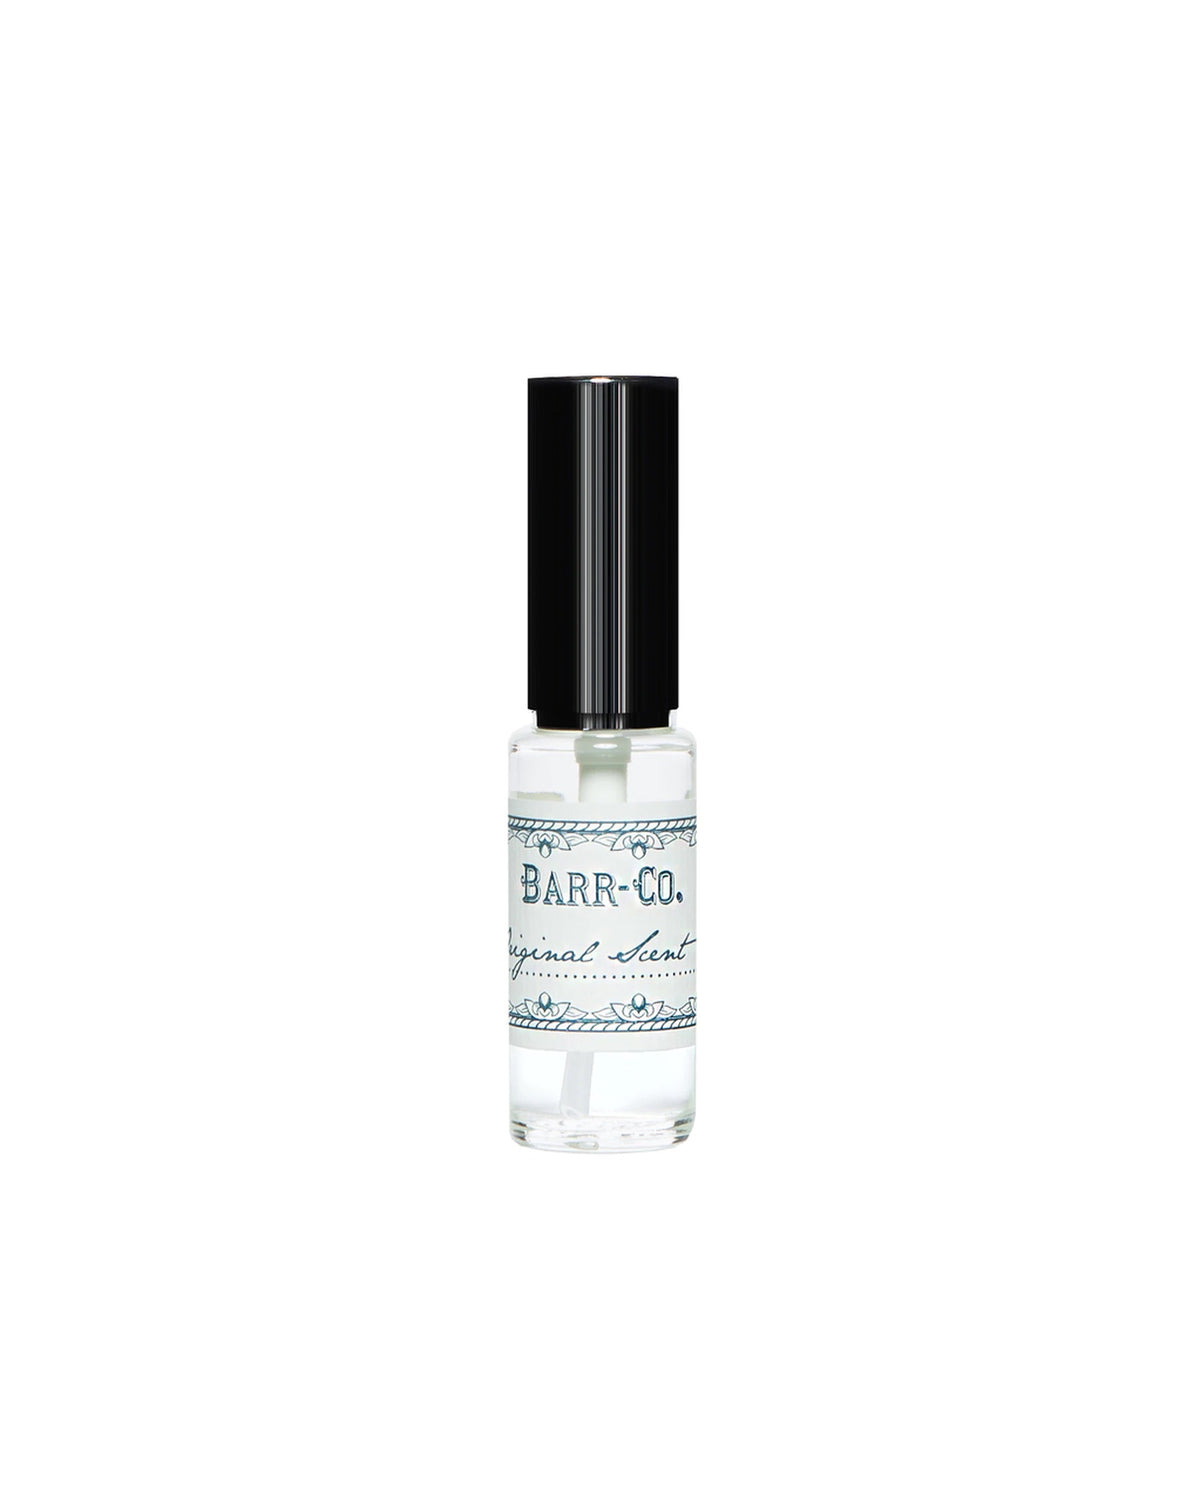 A clear bottle of Barr-Co. Original Scent Mini-Perfume with a black cap, isolated on a white background. The label is vintage styled with elegant typography, featuring notes of vanilla vetiver scent.